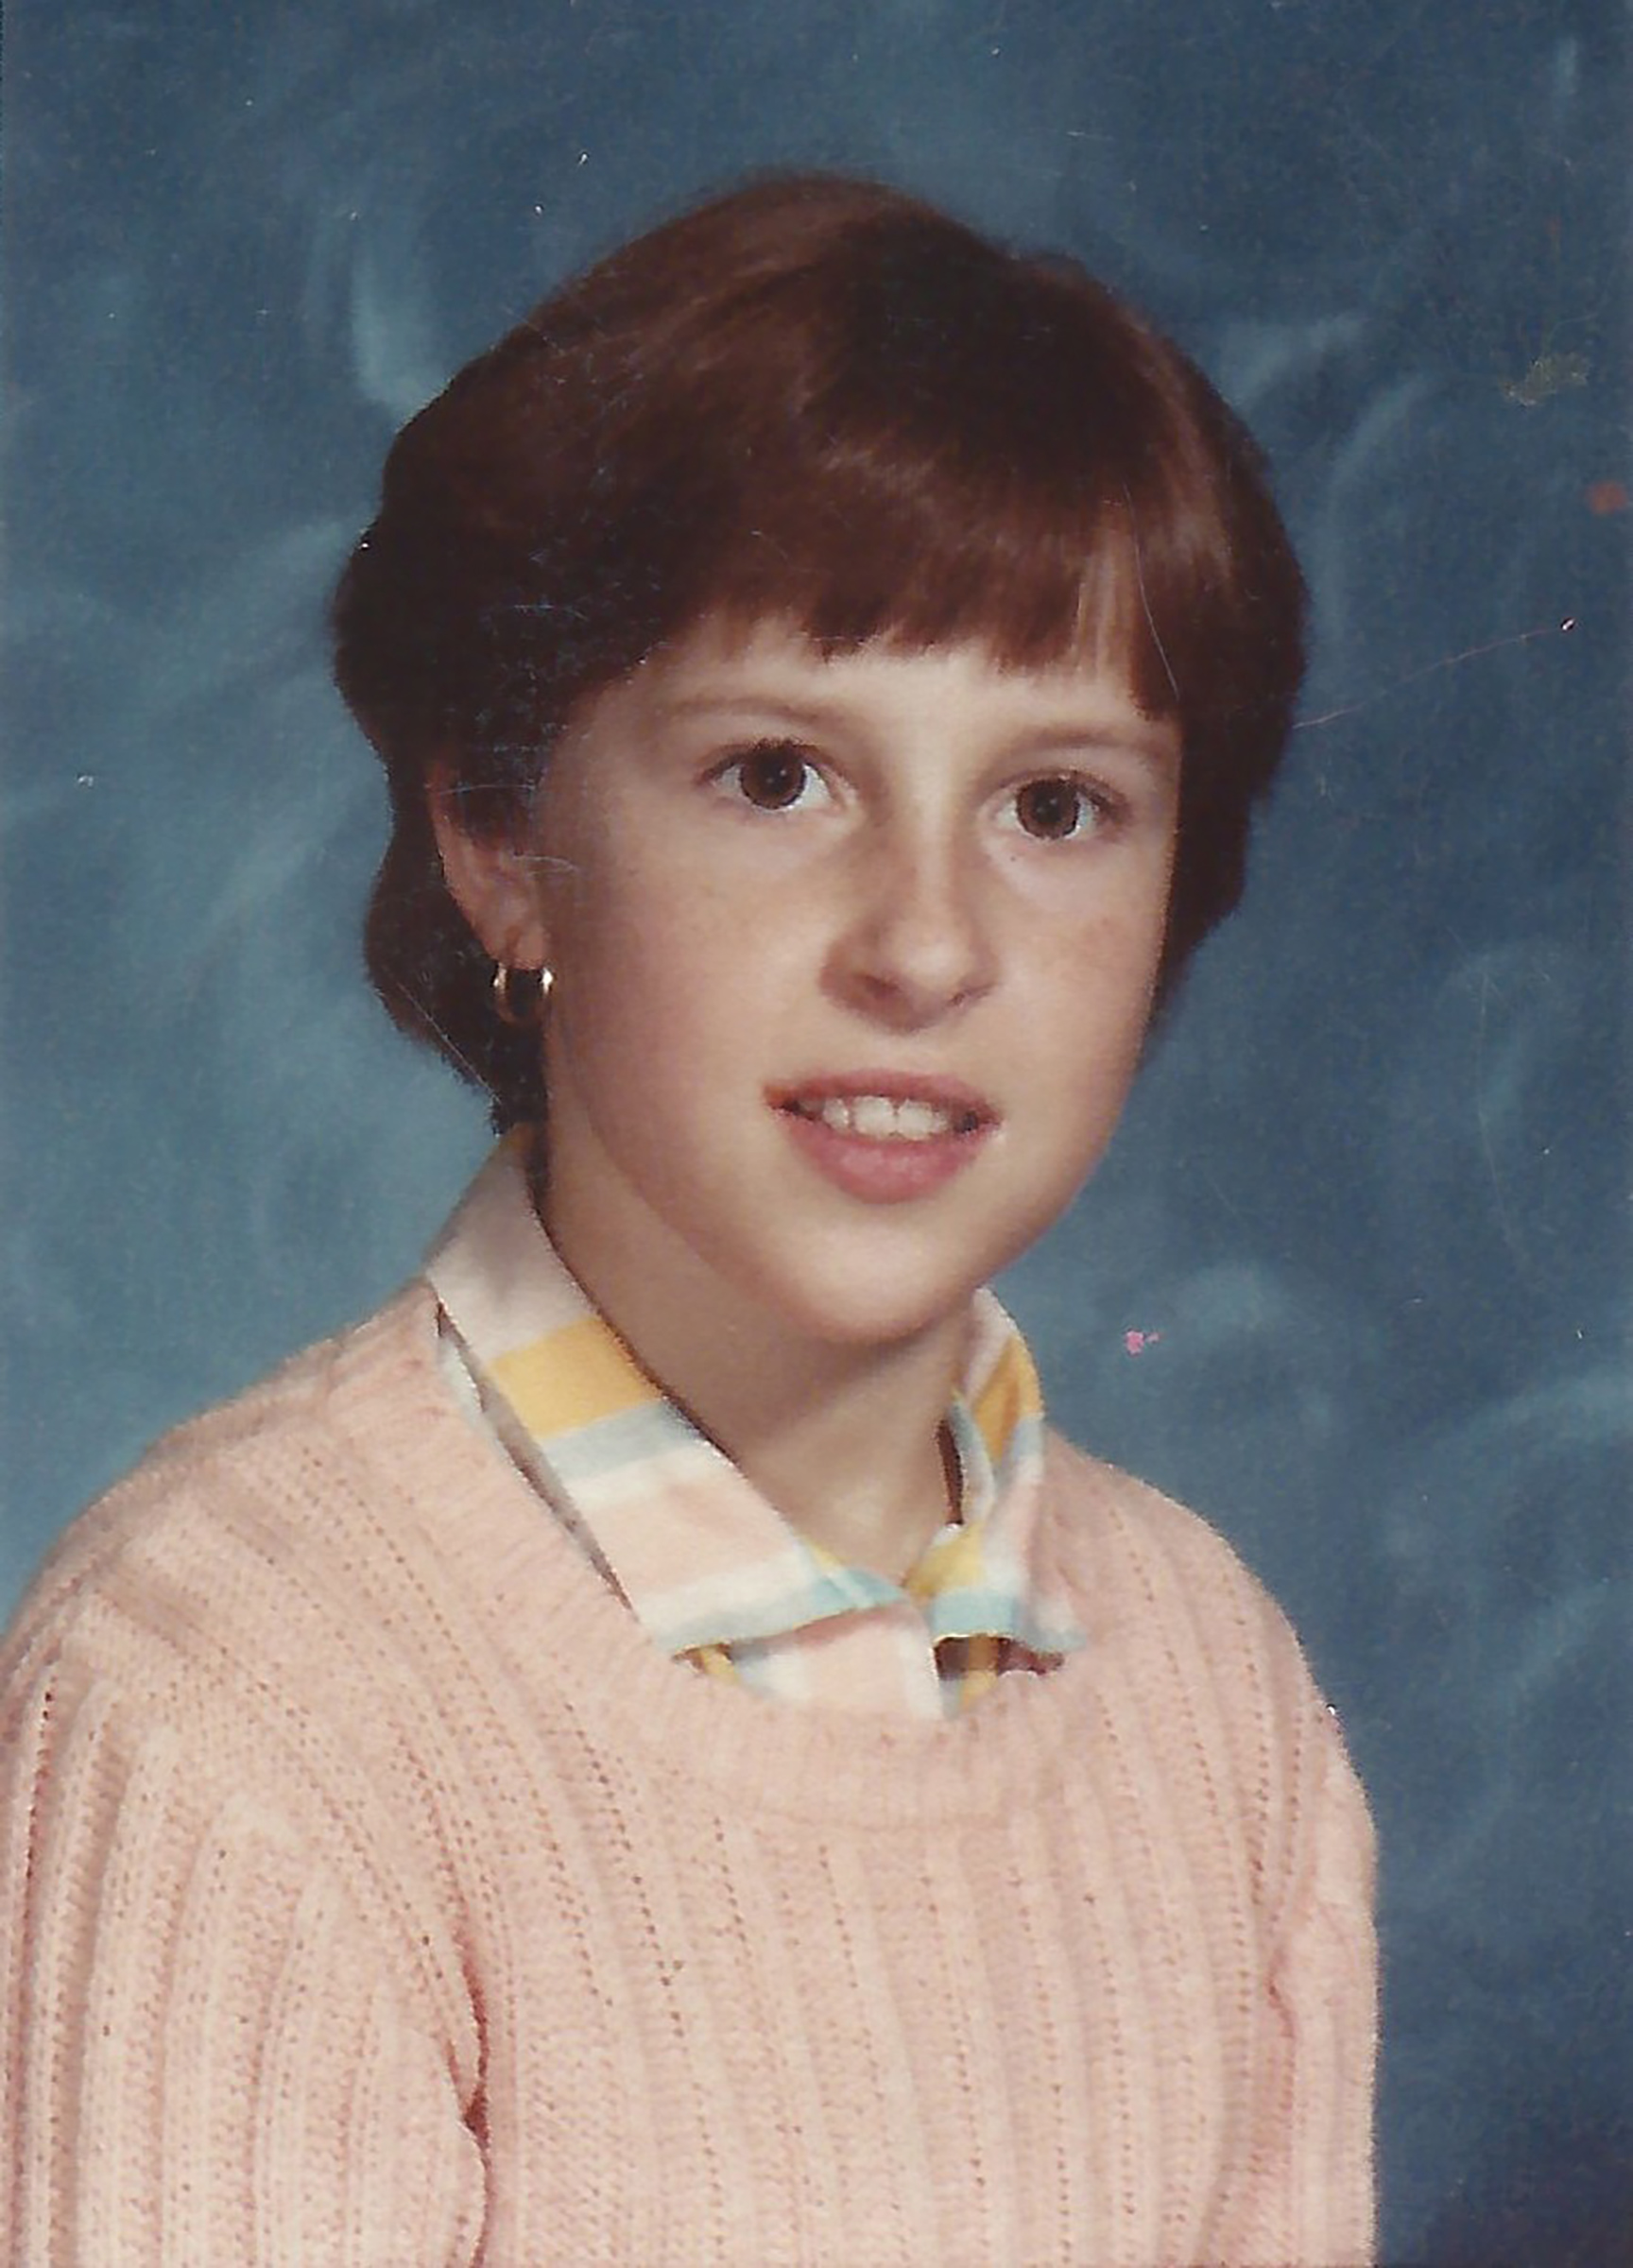 Teristi’s school portrait circa 1984, the year she started at Great Lakes Gymnastics.